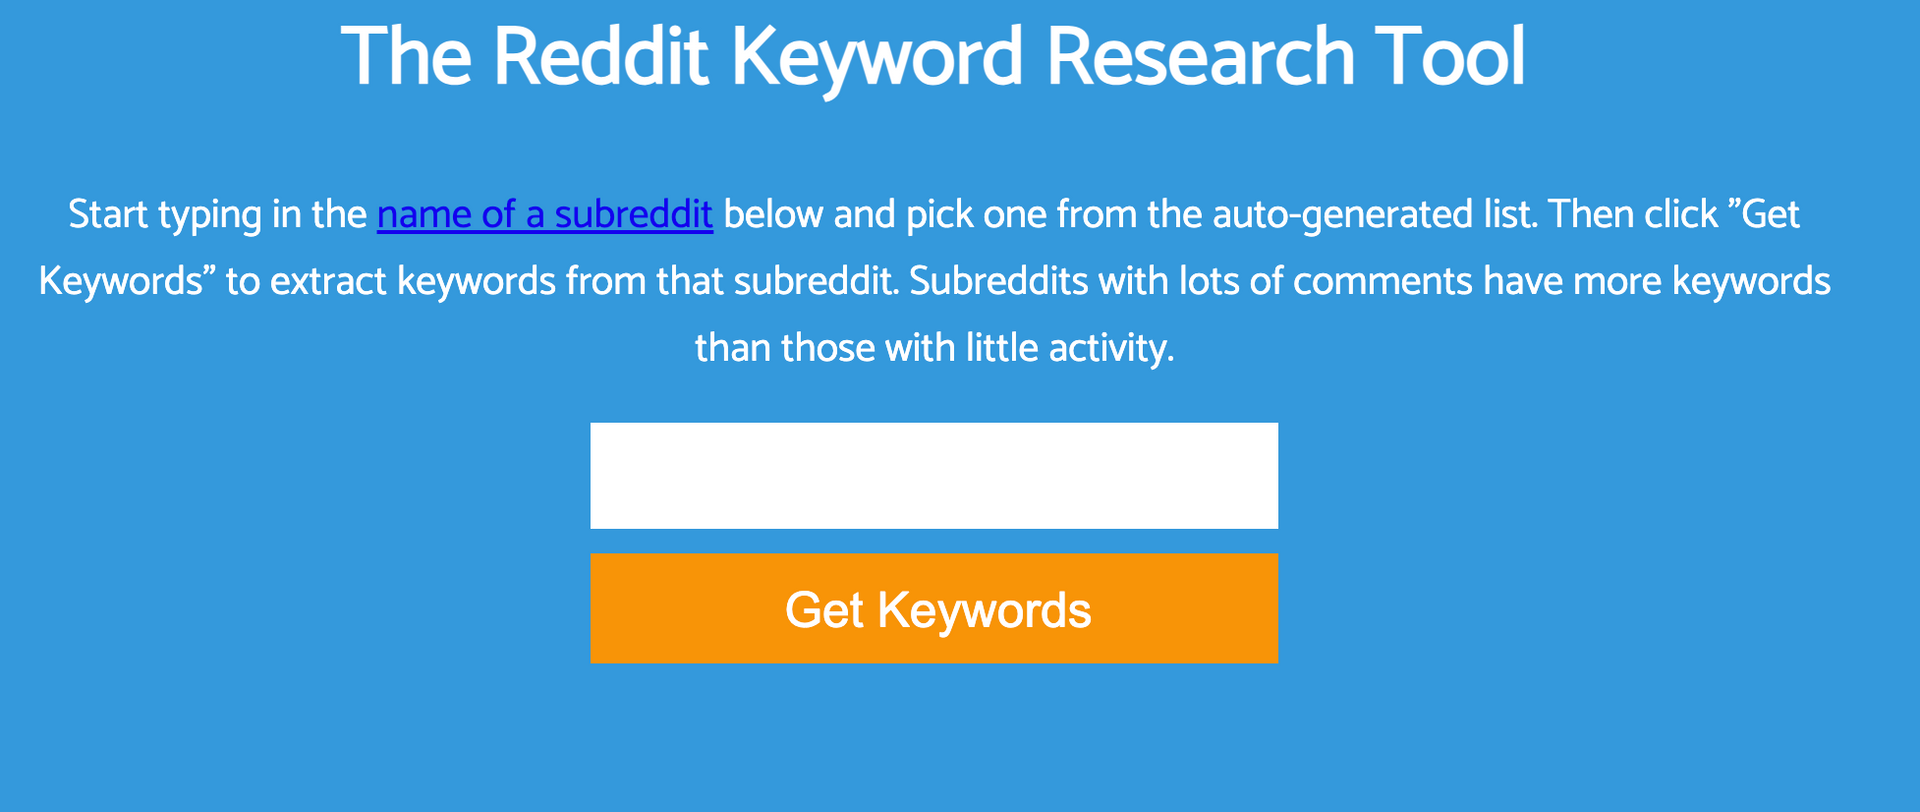 The Reddit Keyword Research Tool Get Keywords search page